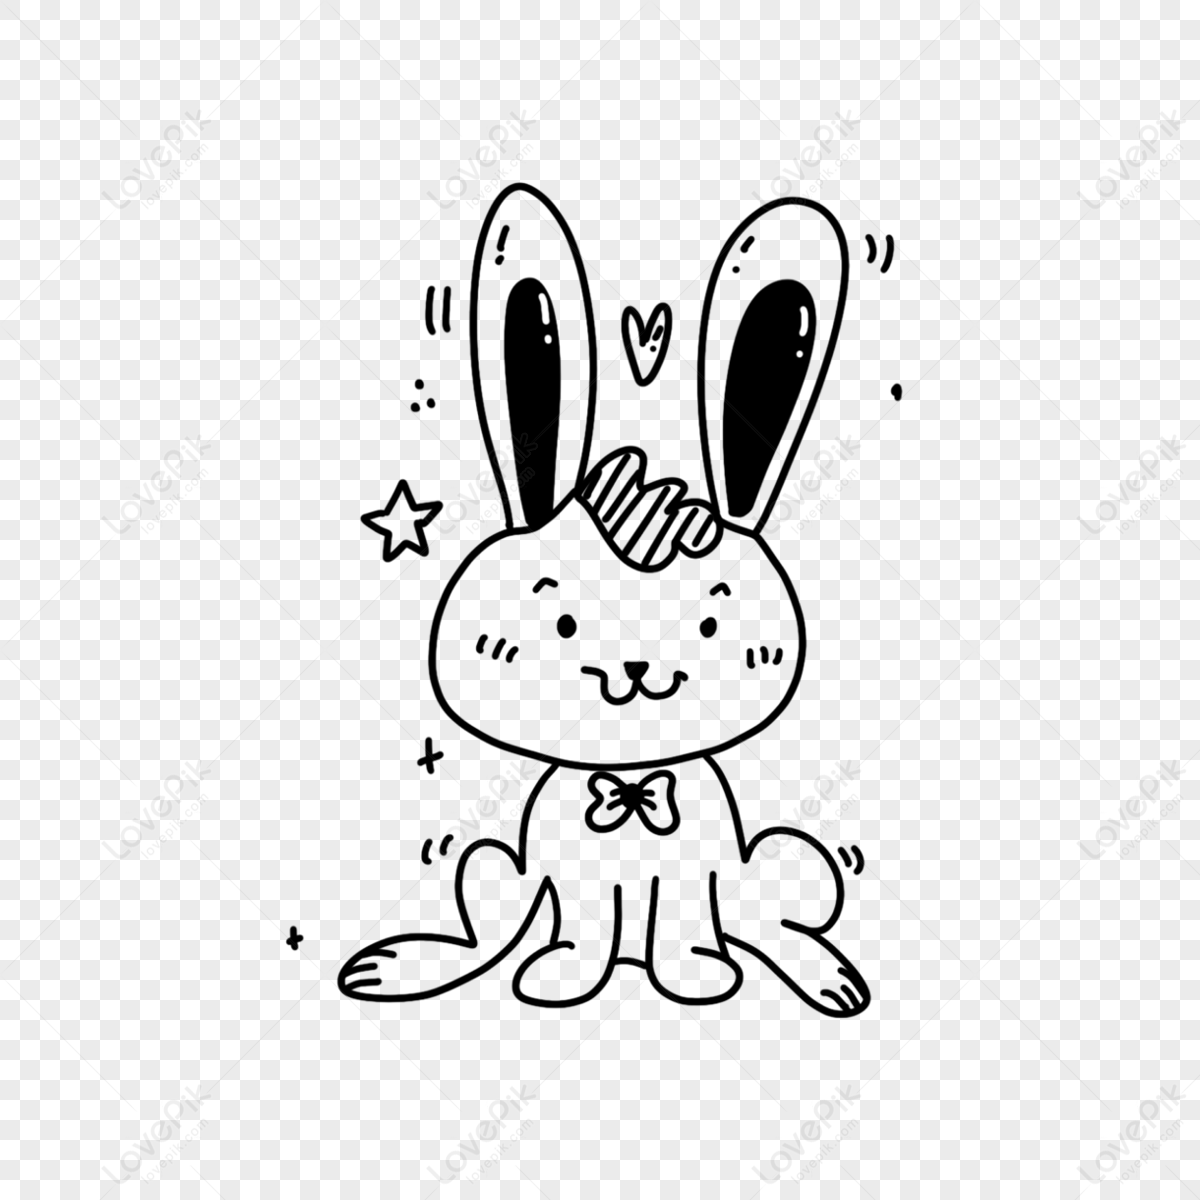 how to draw a cute bunny step by step | Bunny drawing, Rabbit drawing, Easy  doodles drawings